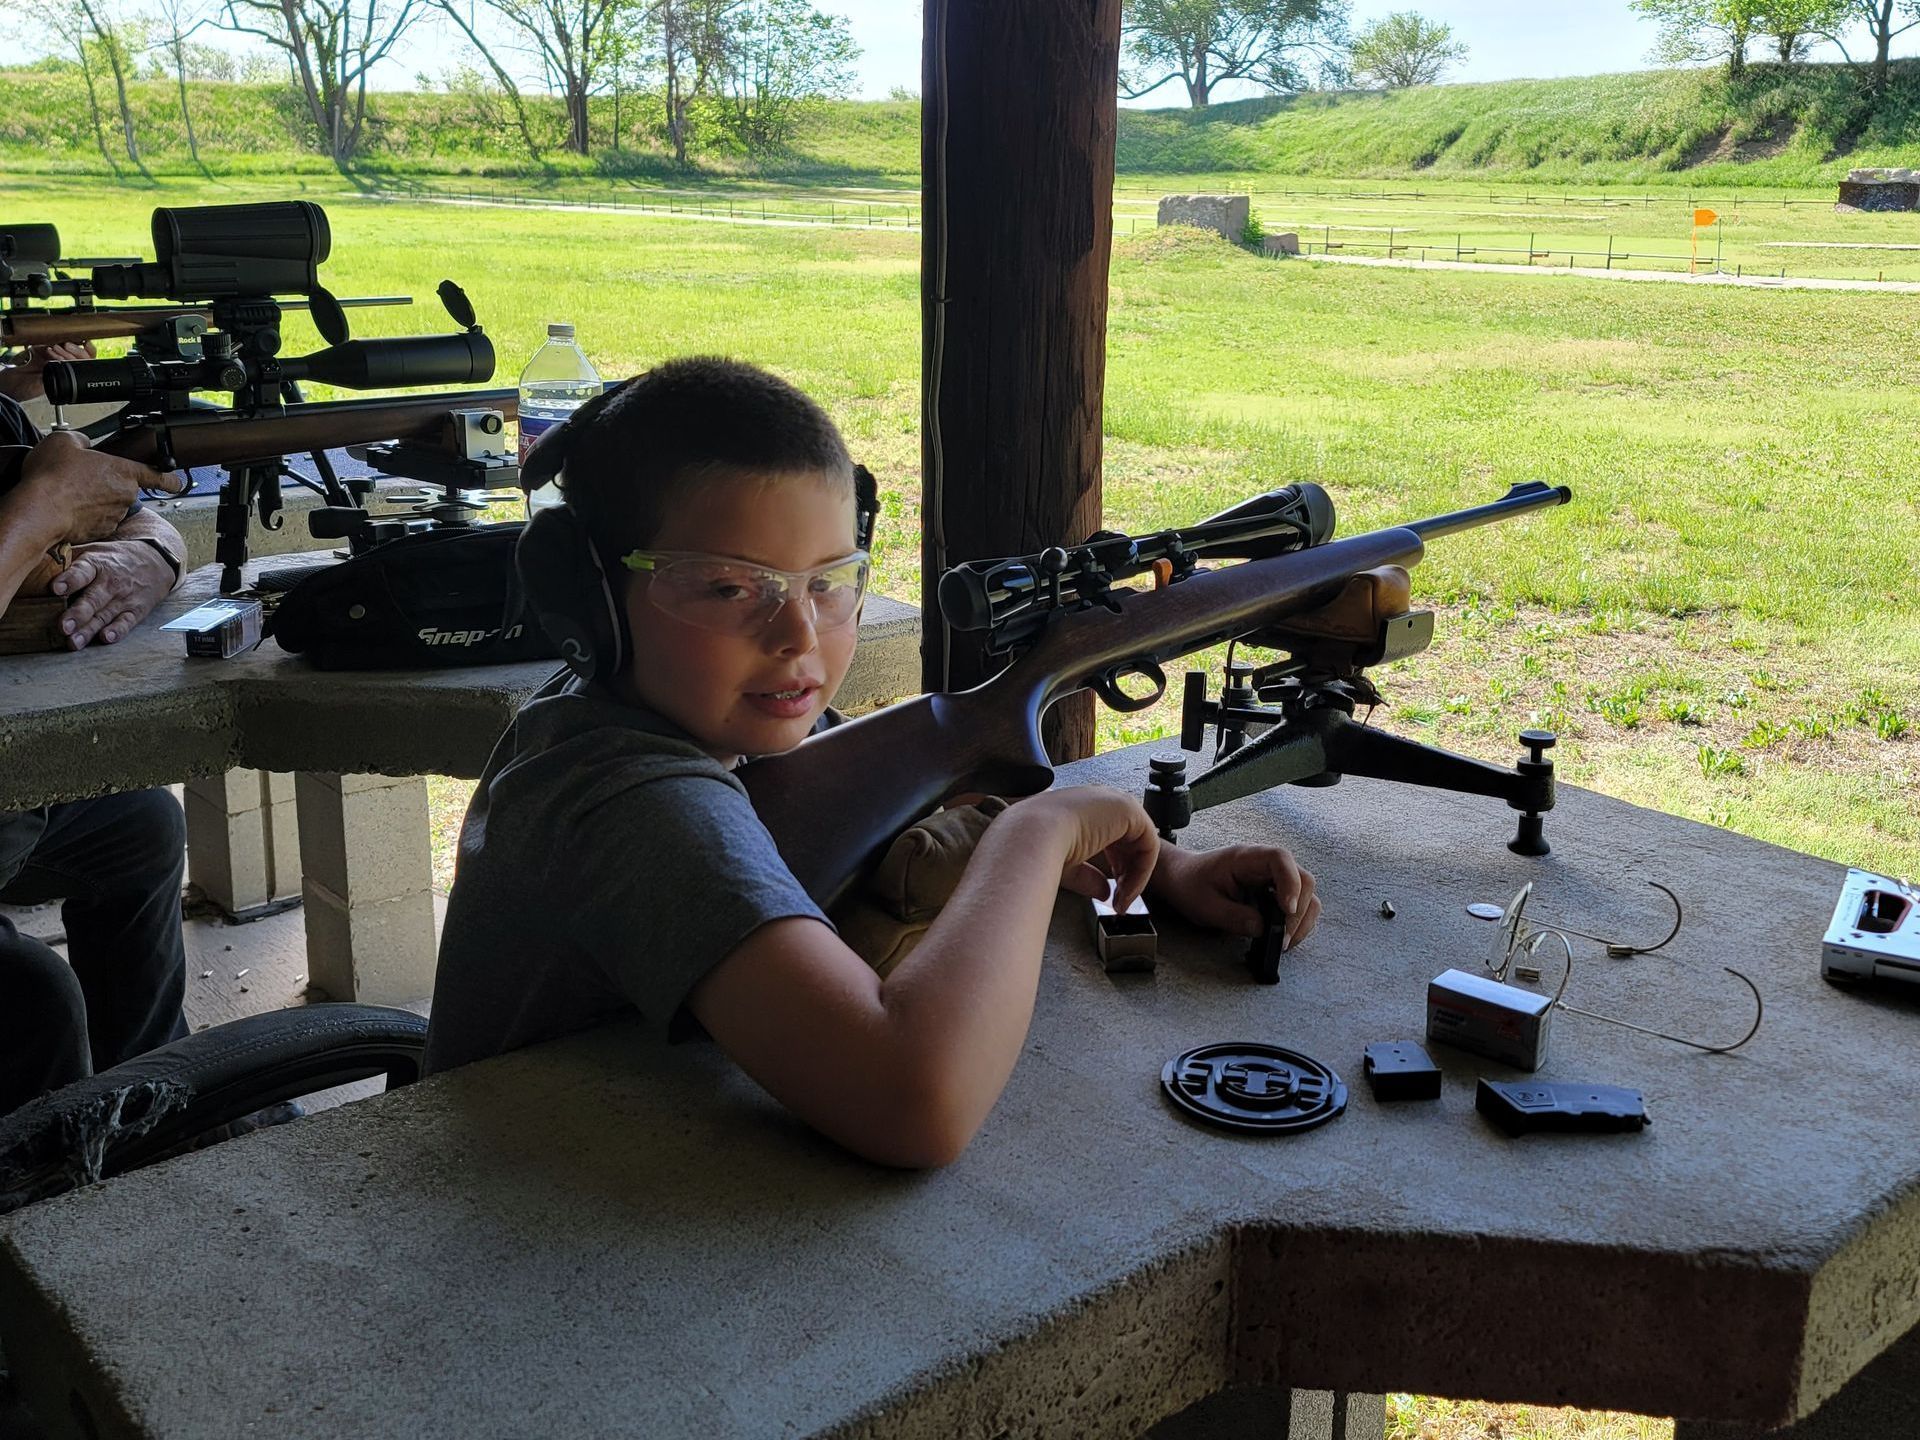 a boy with safety glasses on sitting at gun range holding a rifle